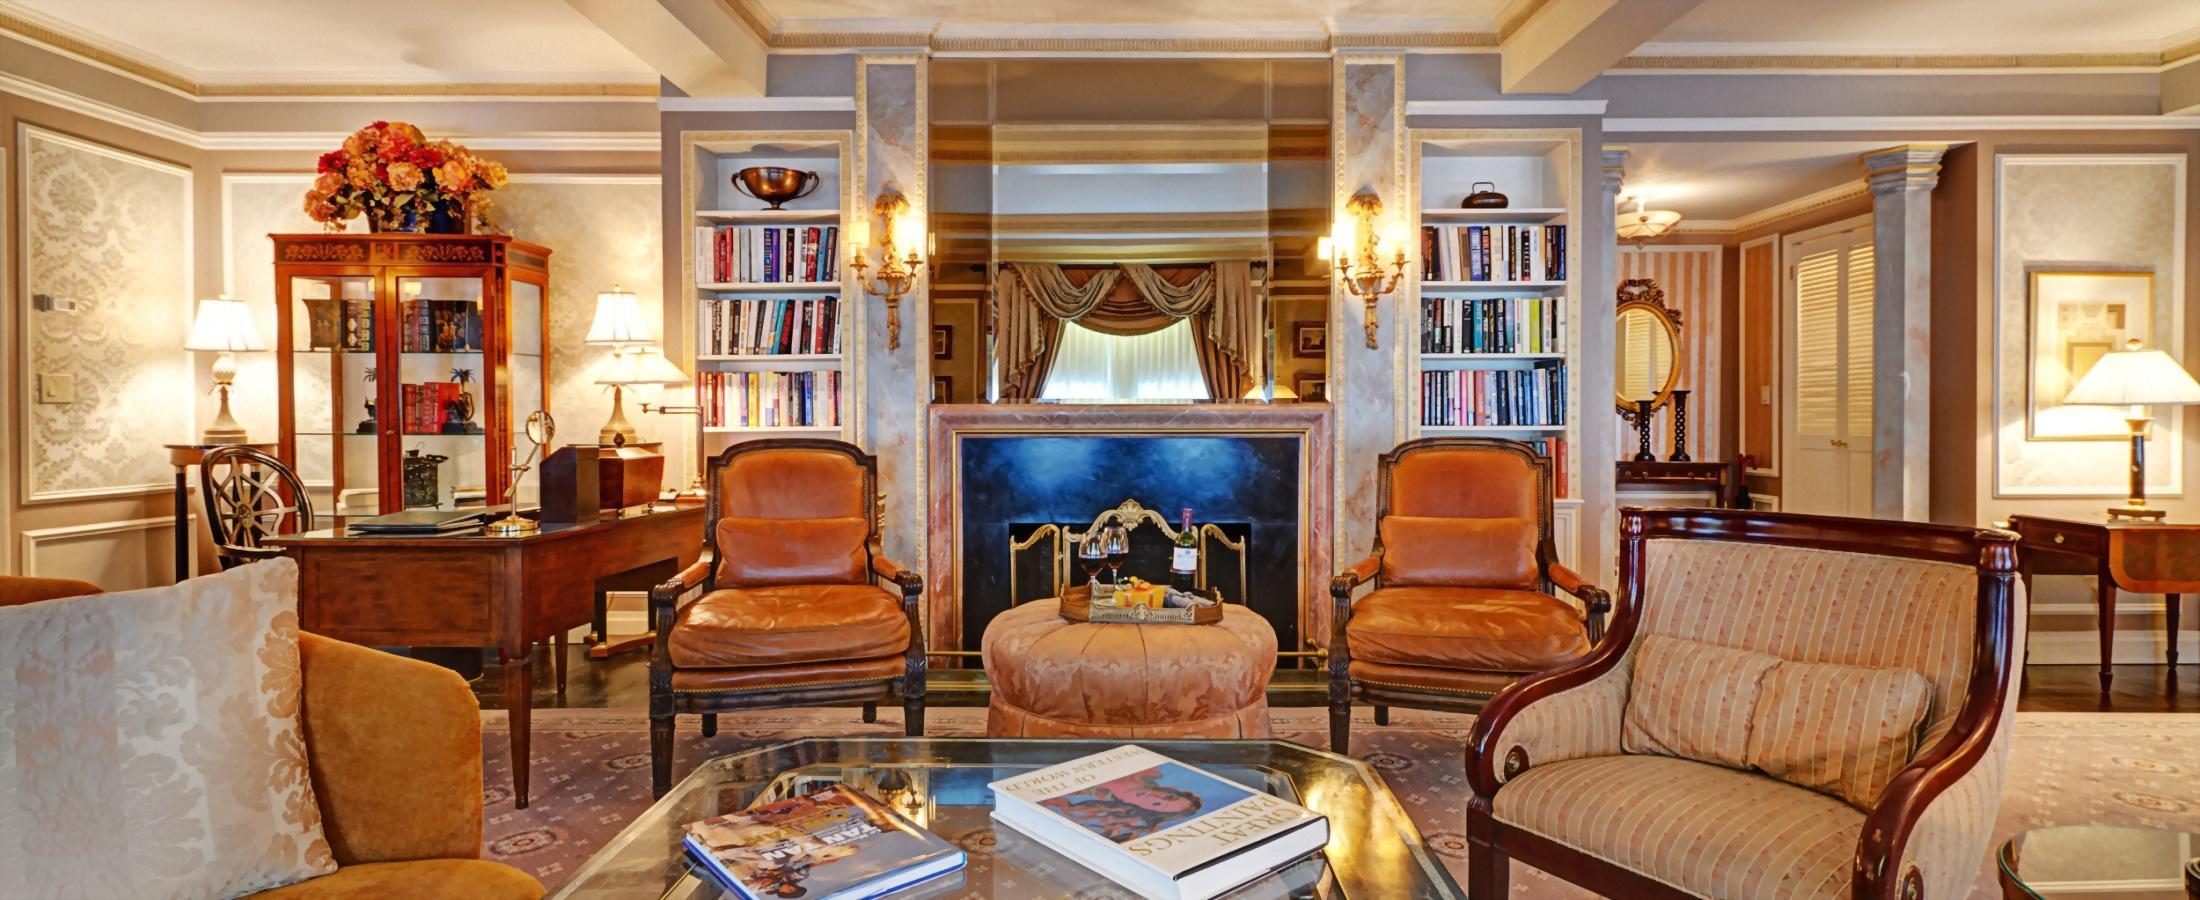 The living room of the Presidential Suite honoring Vaclav Havel boasts a faux fireplace, a baby grand piano, and large dining table.